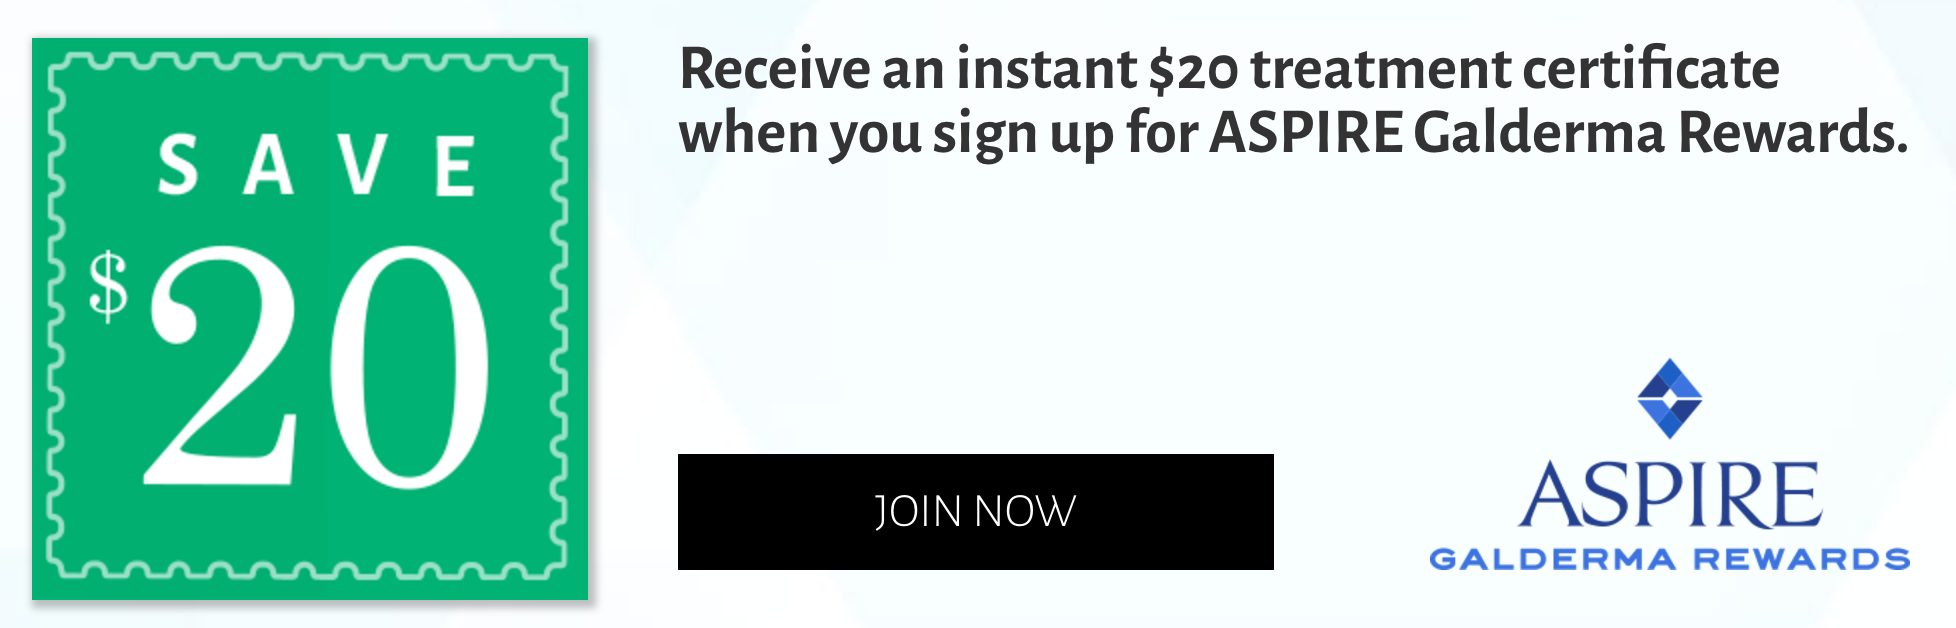 Receive an instant $20 treatment certificate when you sign up for ASPIRE Galderma Rewards - Join Now